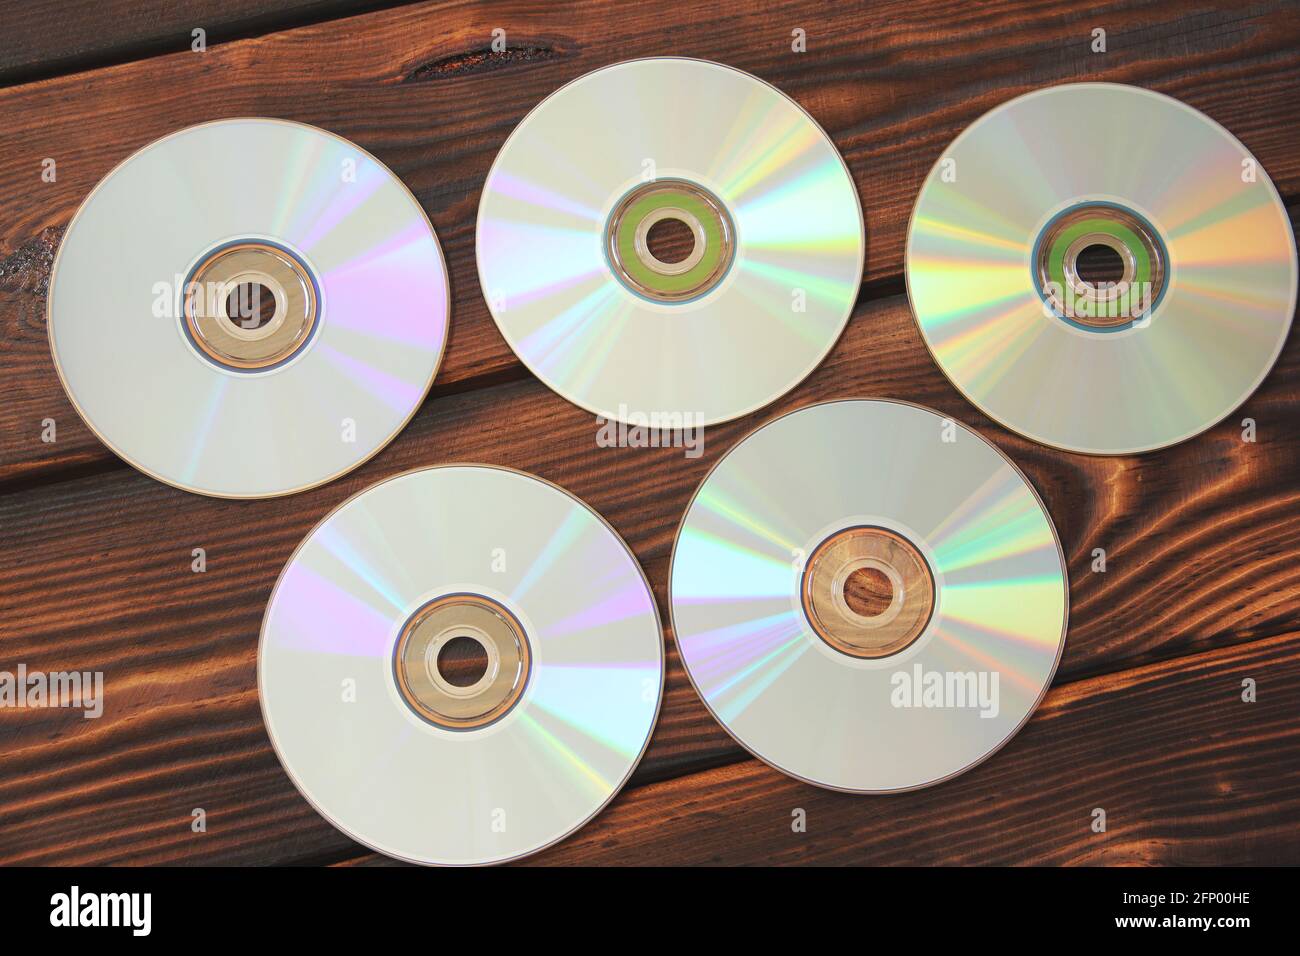 Computer disks on a wooden background Stock Photo